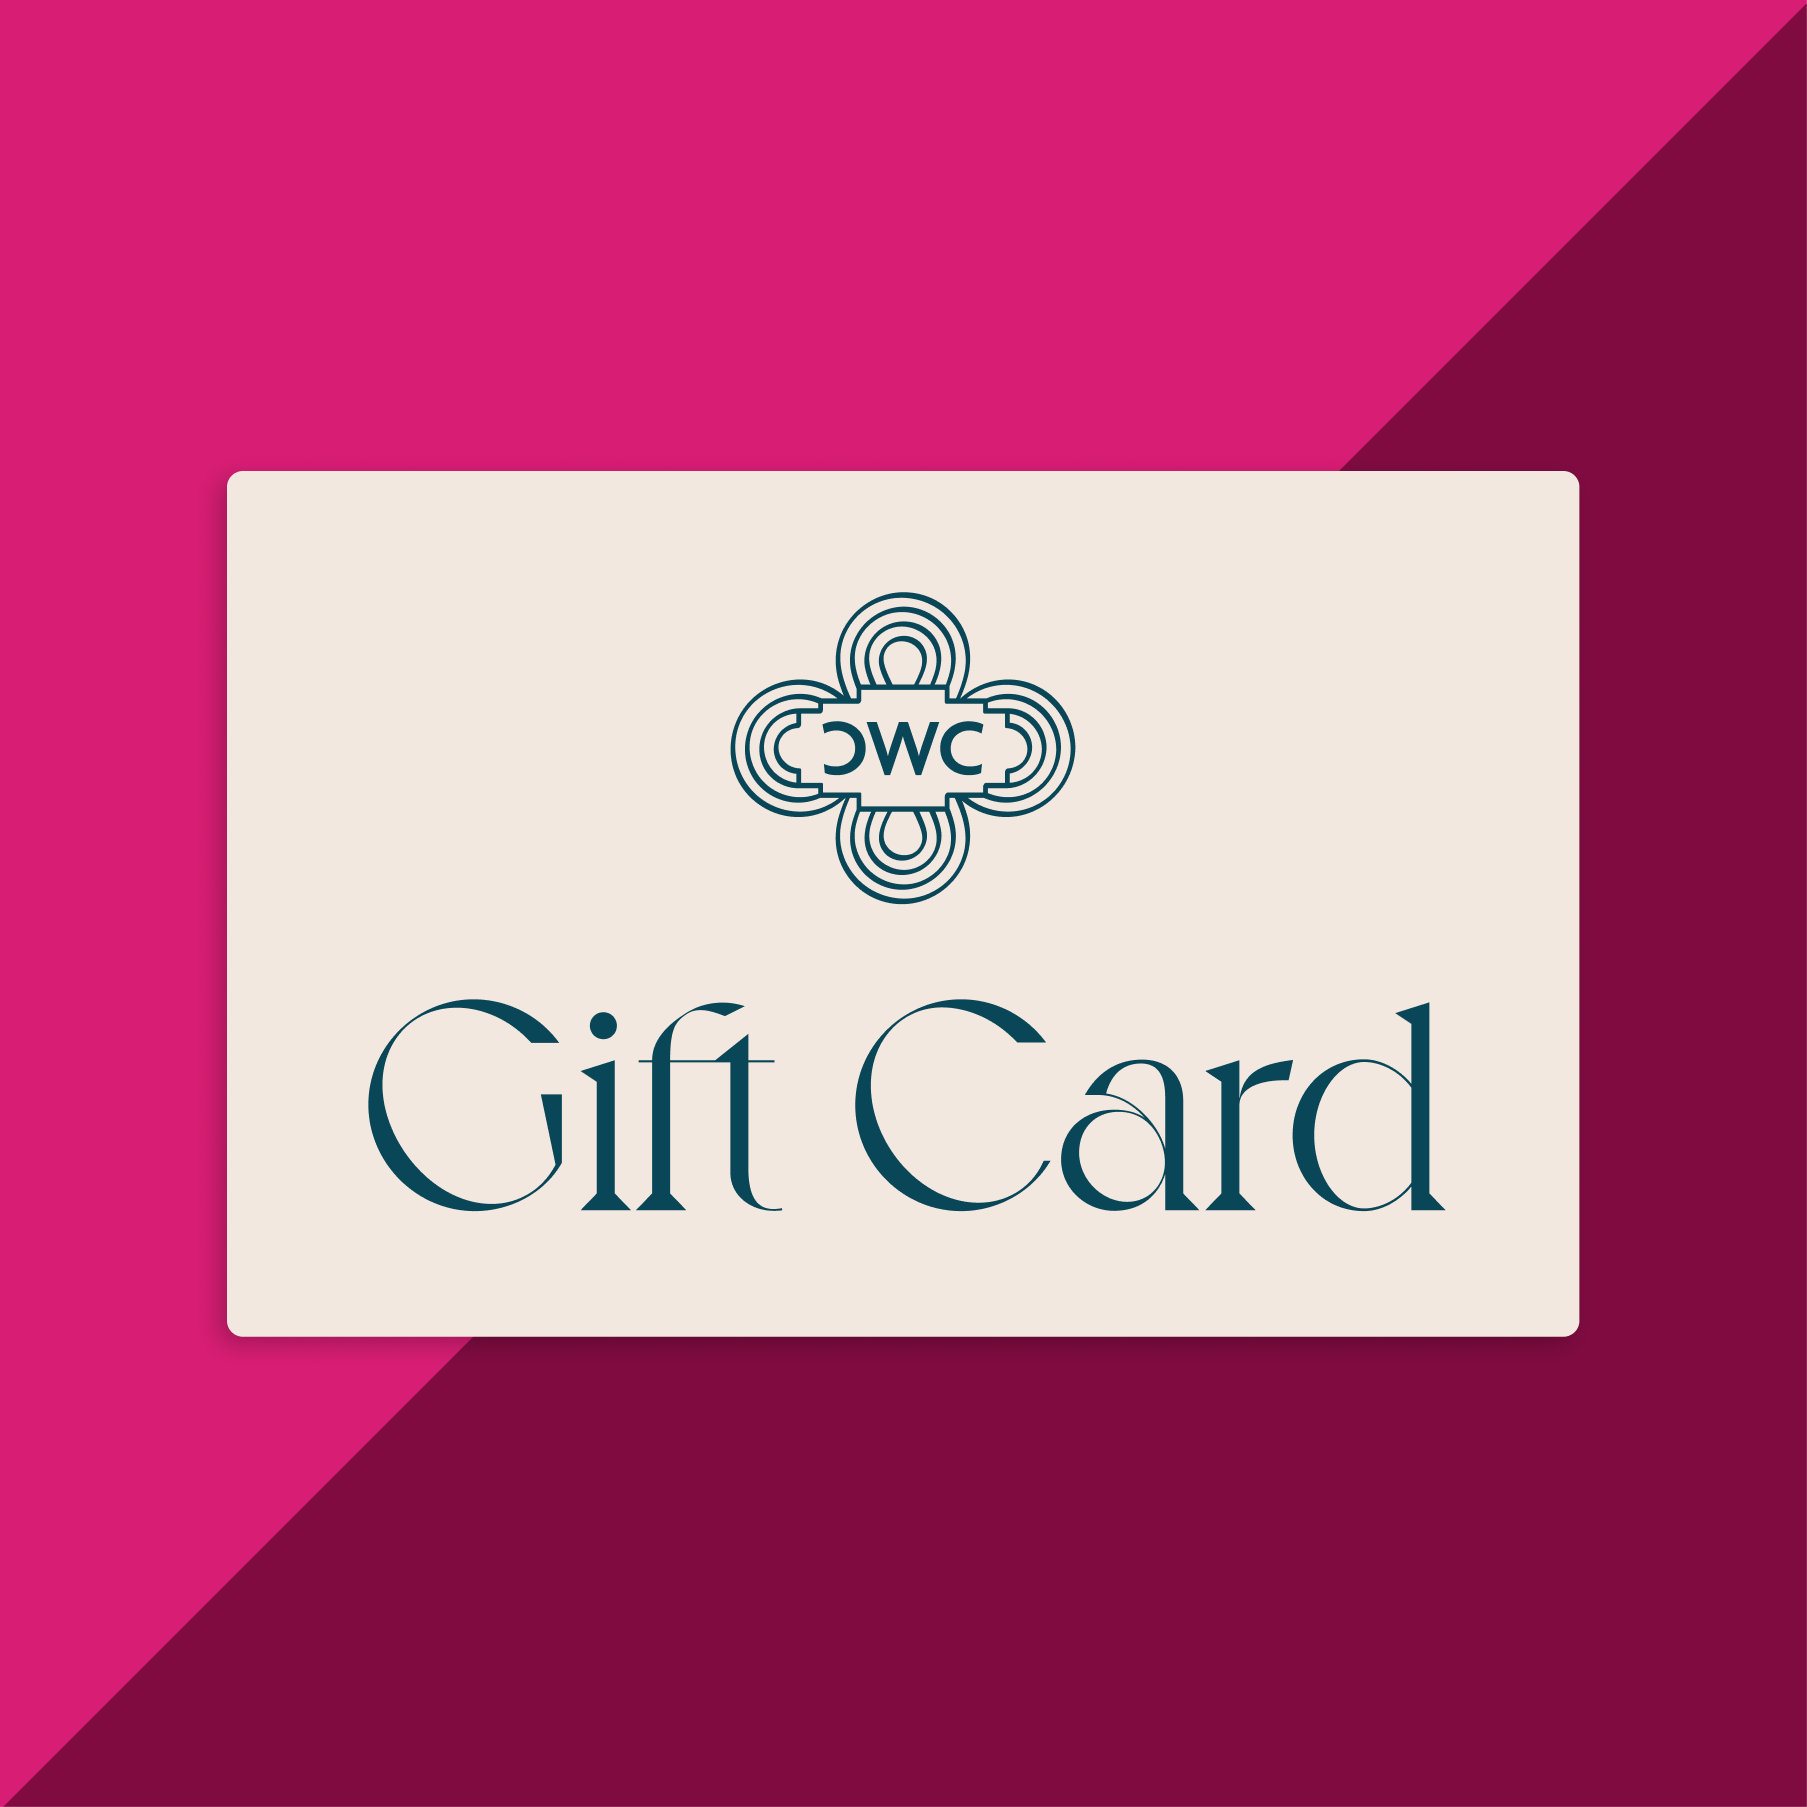 Gift Cards for sale